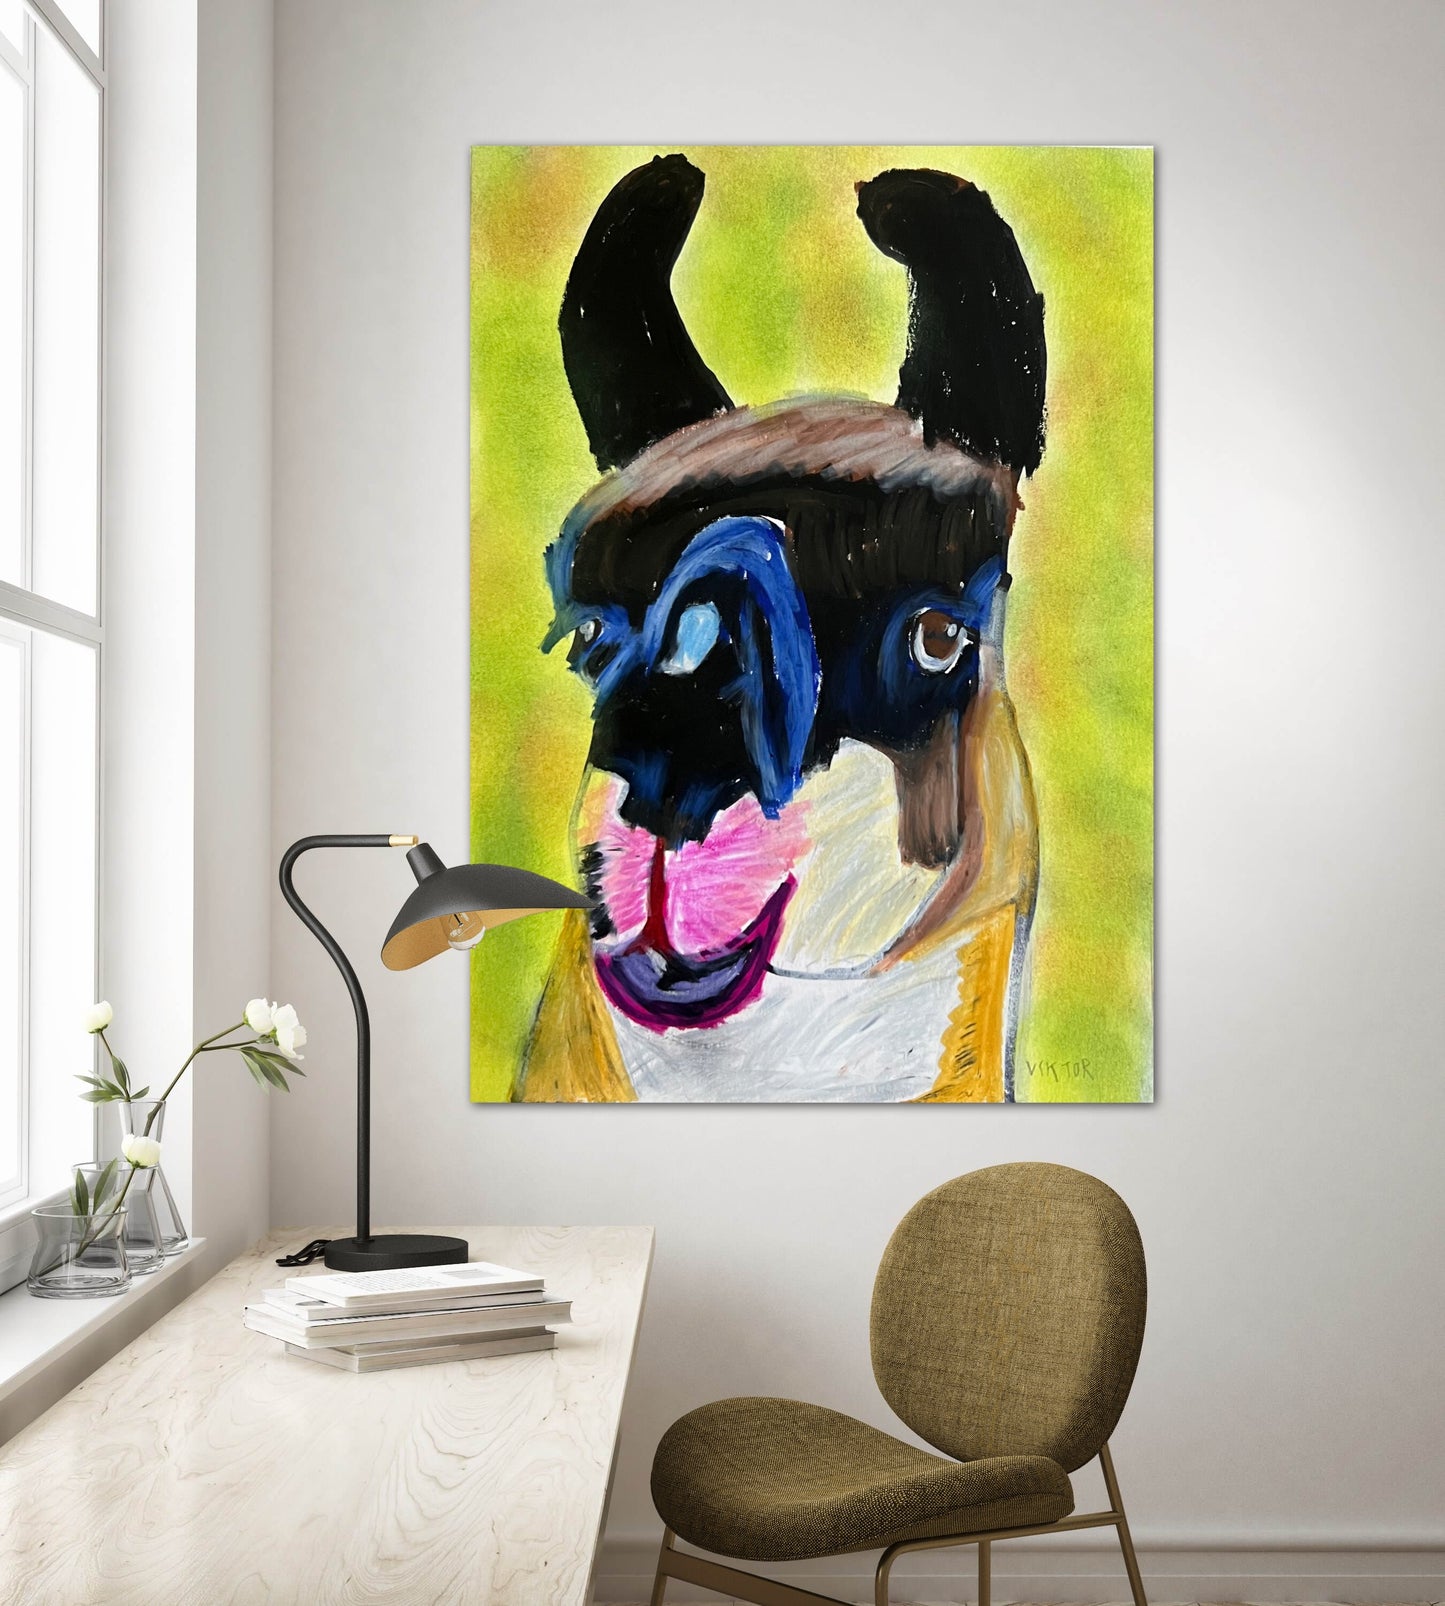 The Llama - Print, Poster or Stretched Canvas Print in more sizes